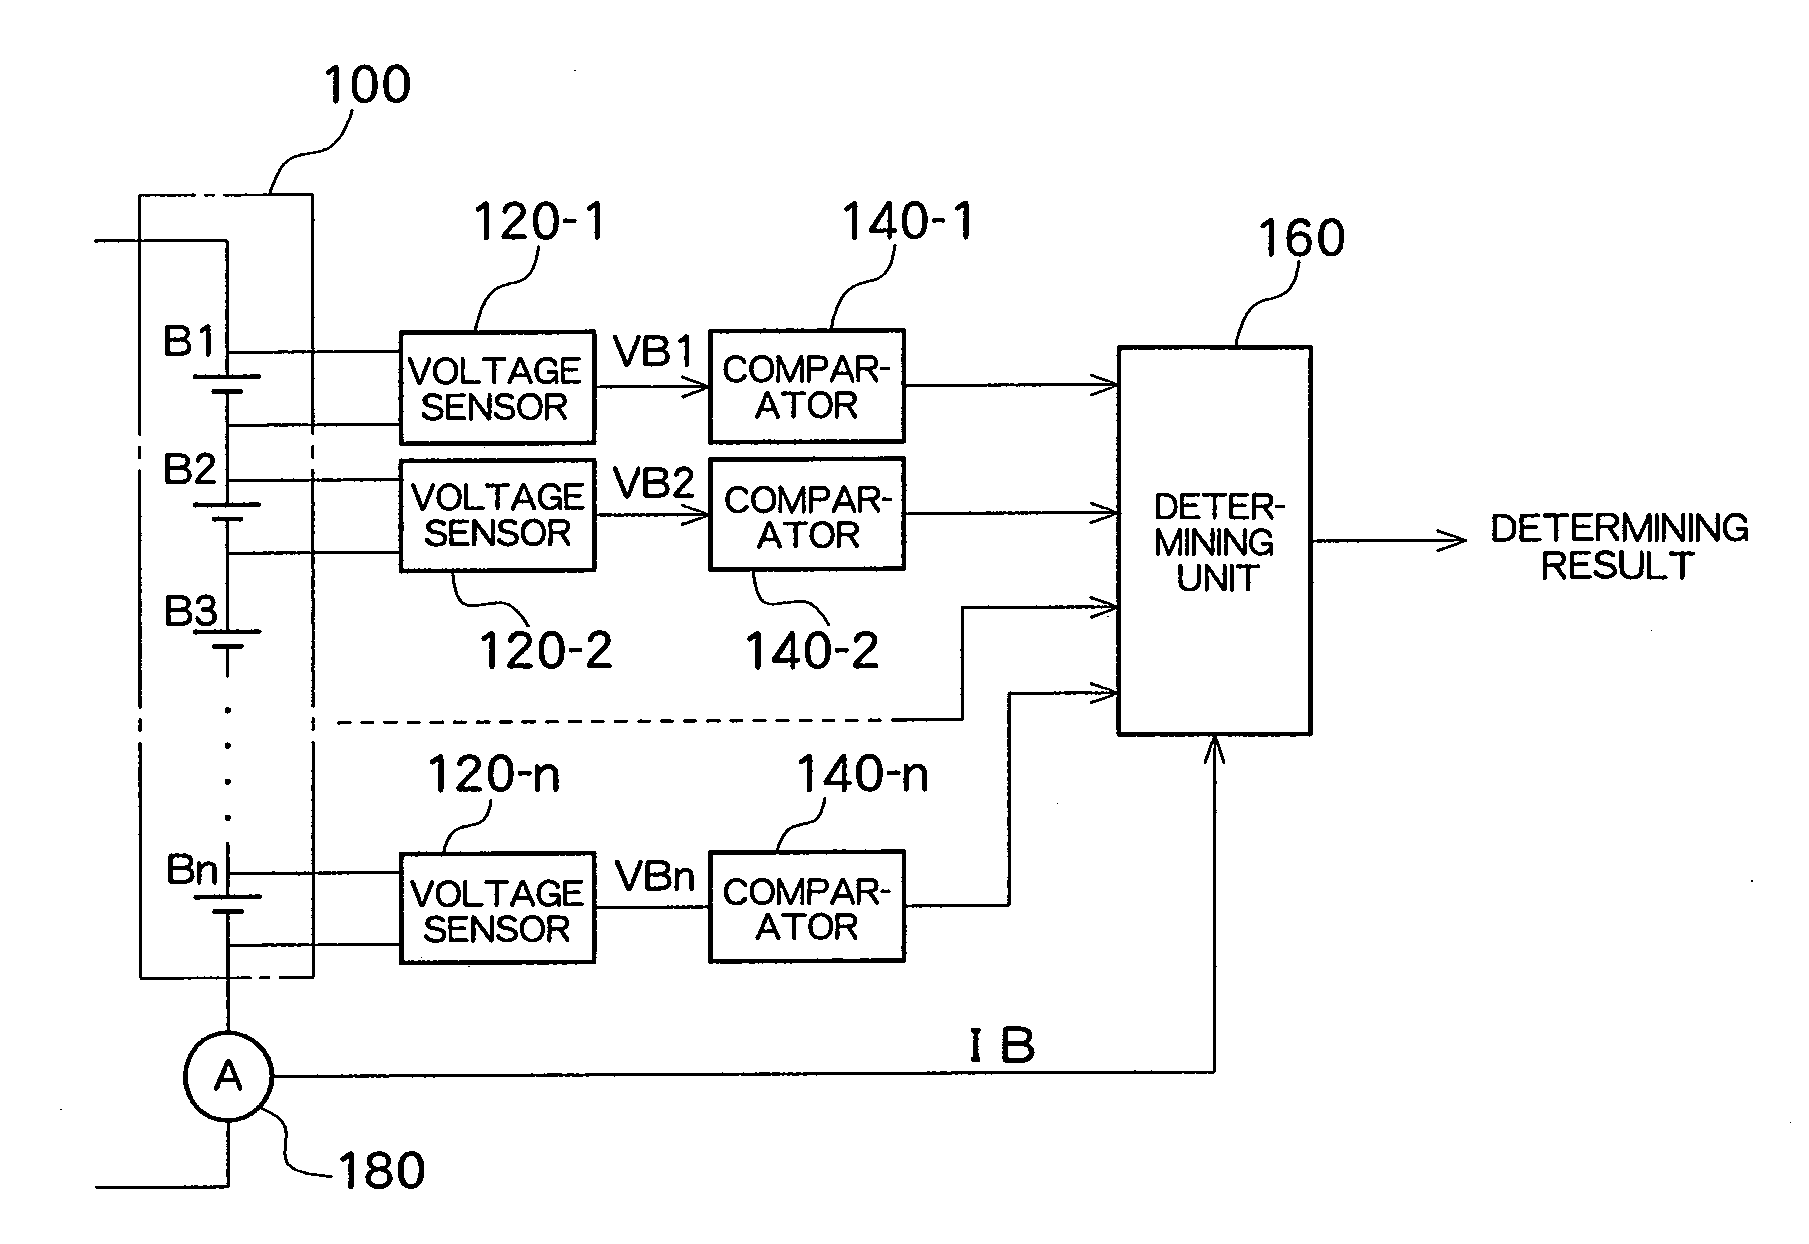 Apparatus and method for detecting charged state of electric storage device